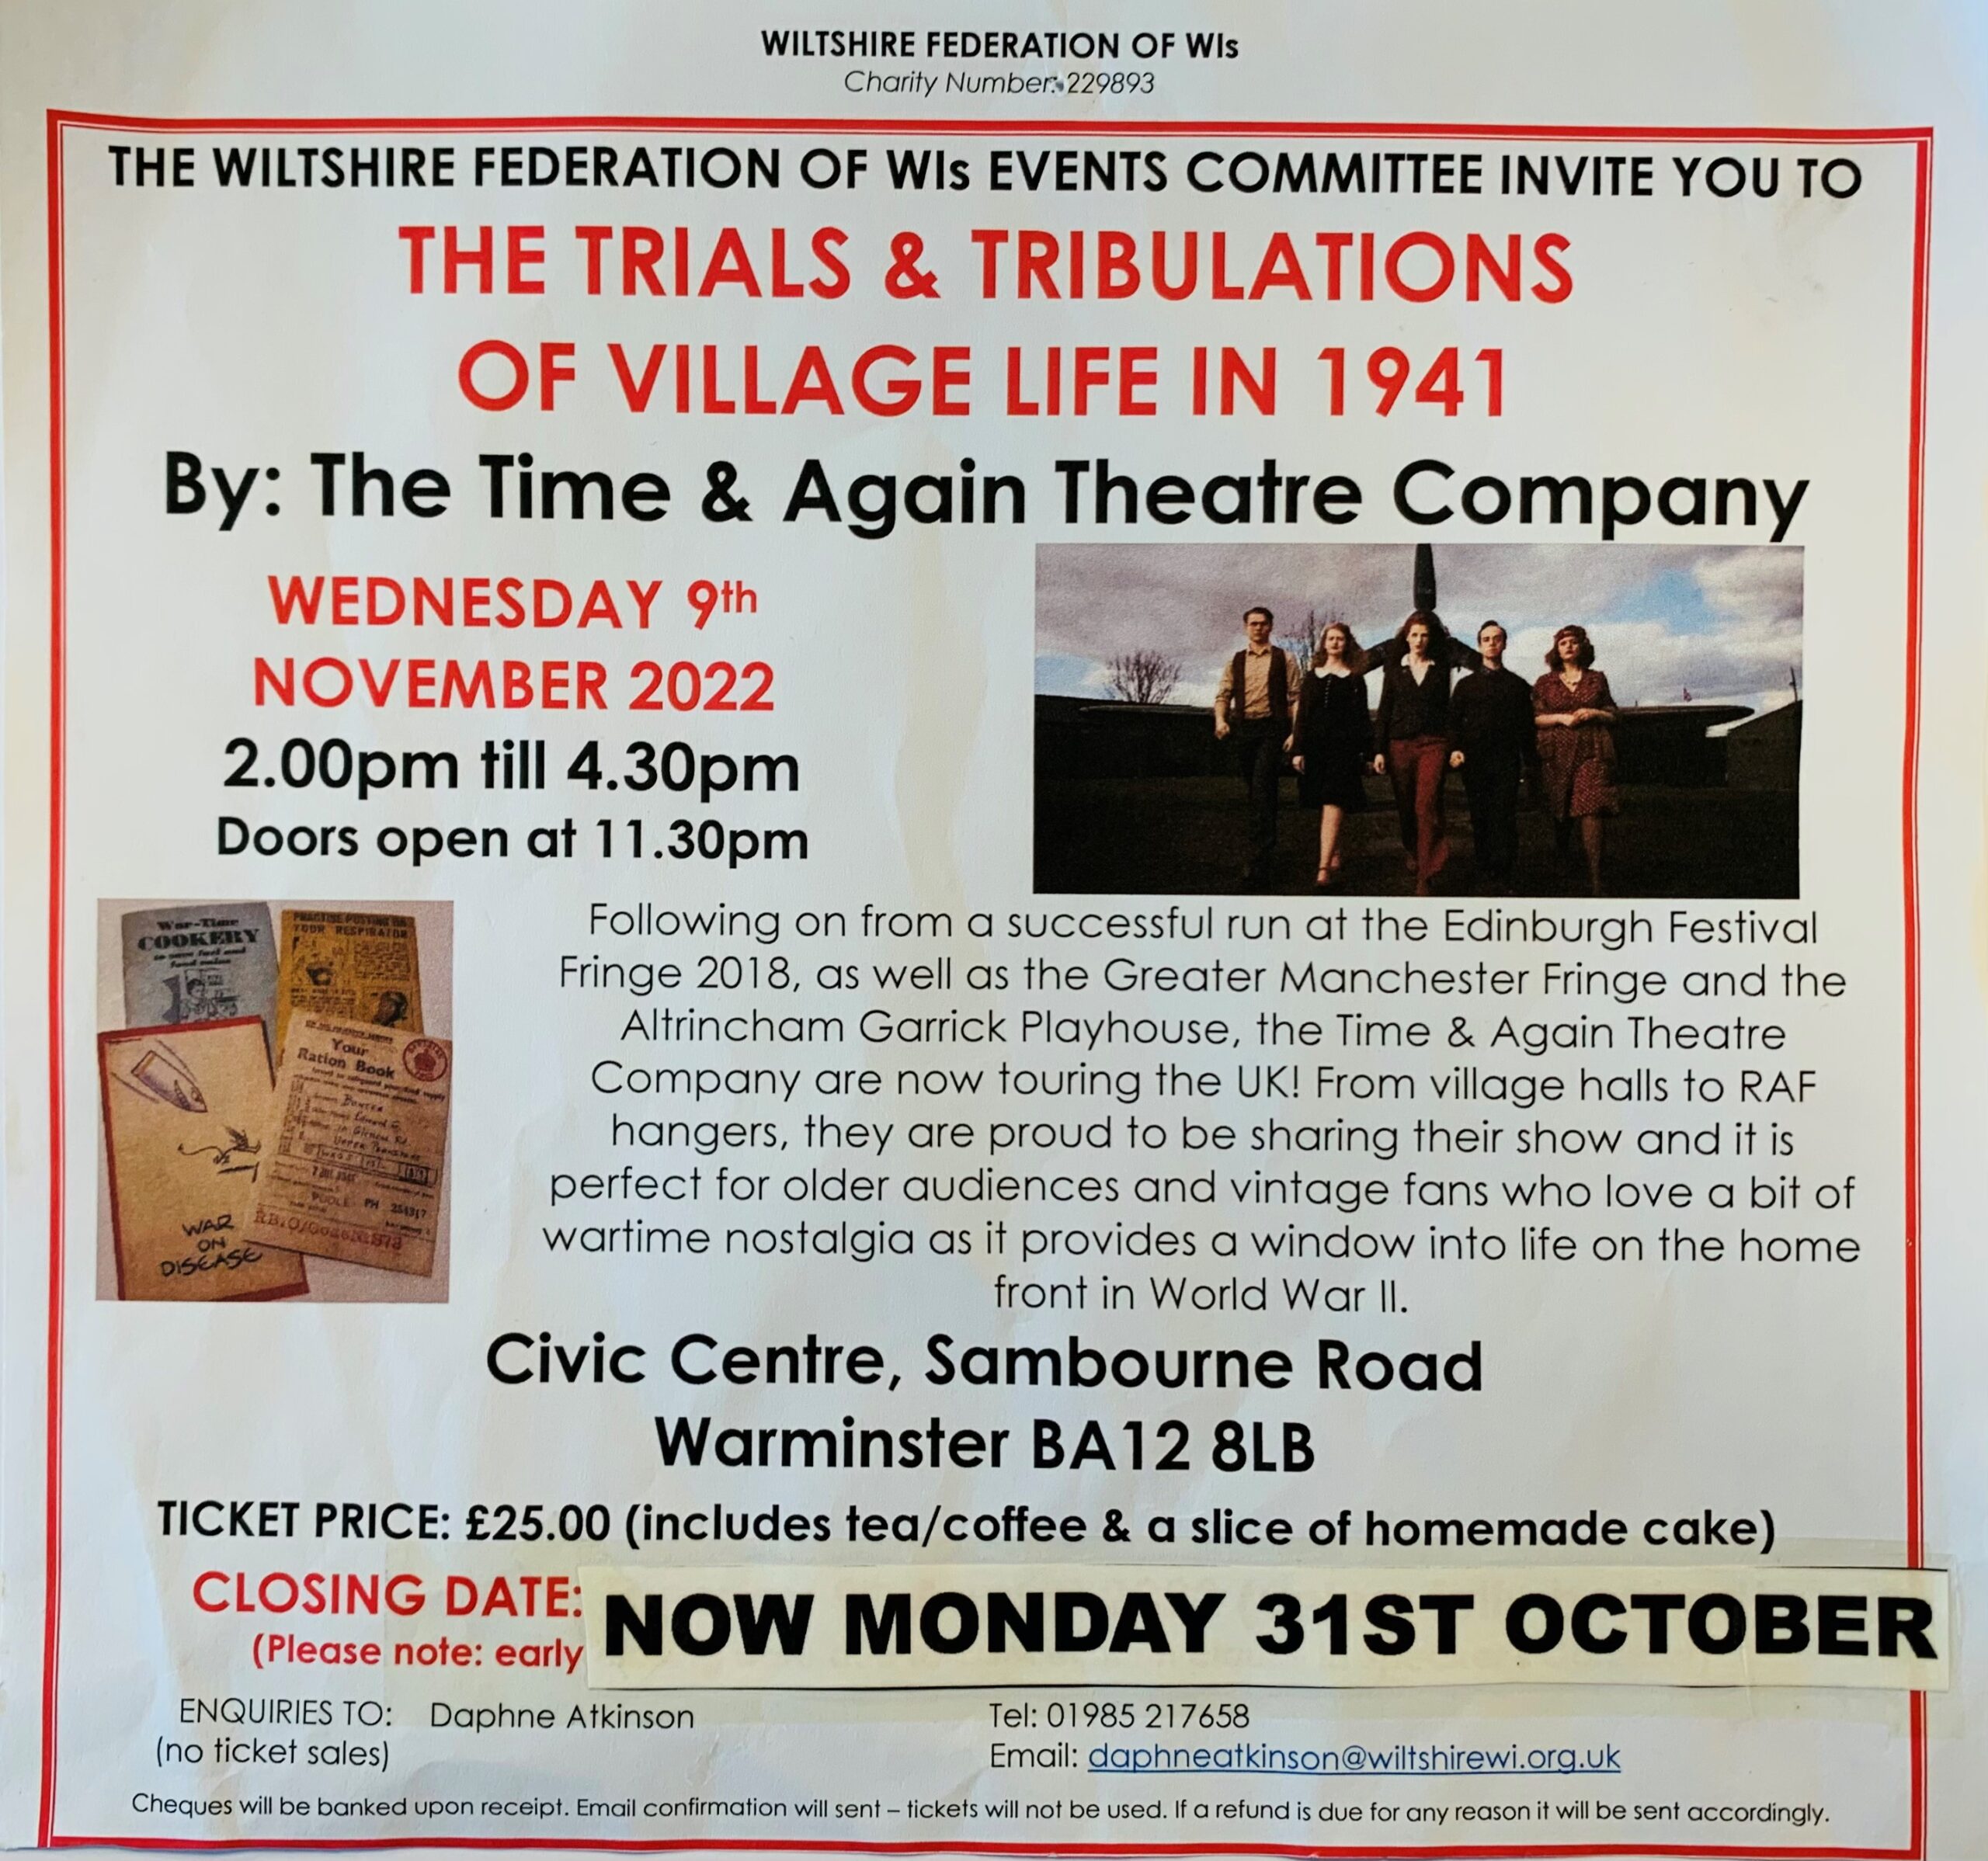 Wiltshire Federation of WIs presents: The Trials and Tribulations of Village Life in 1941